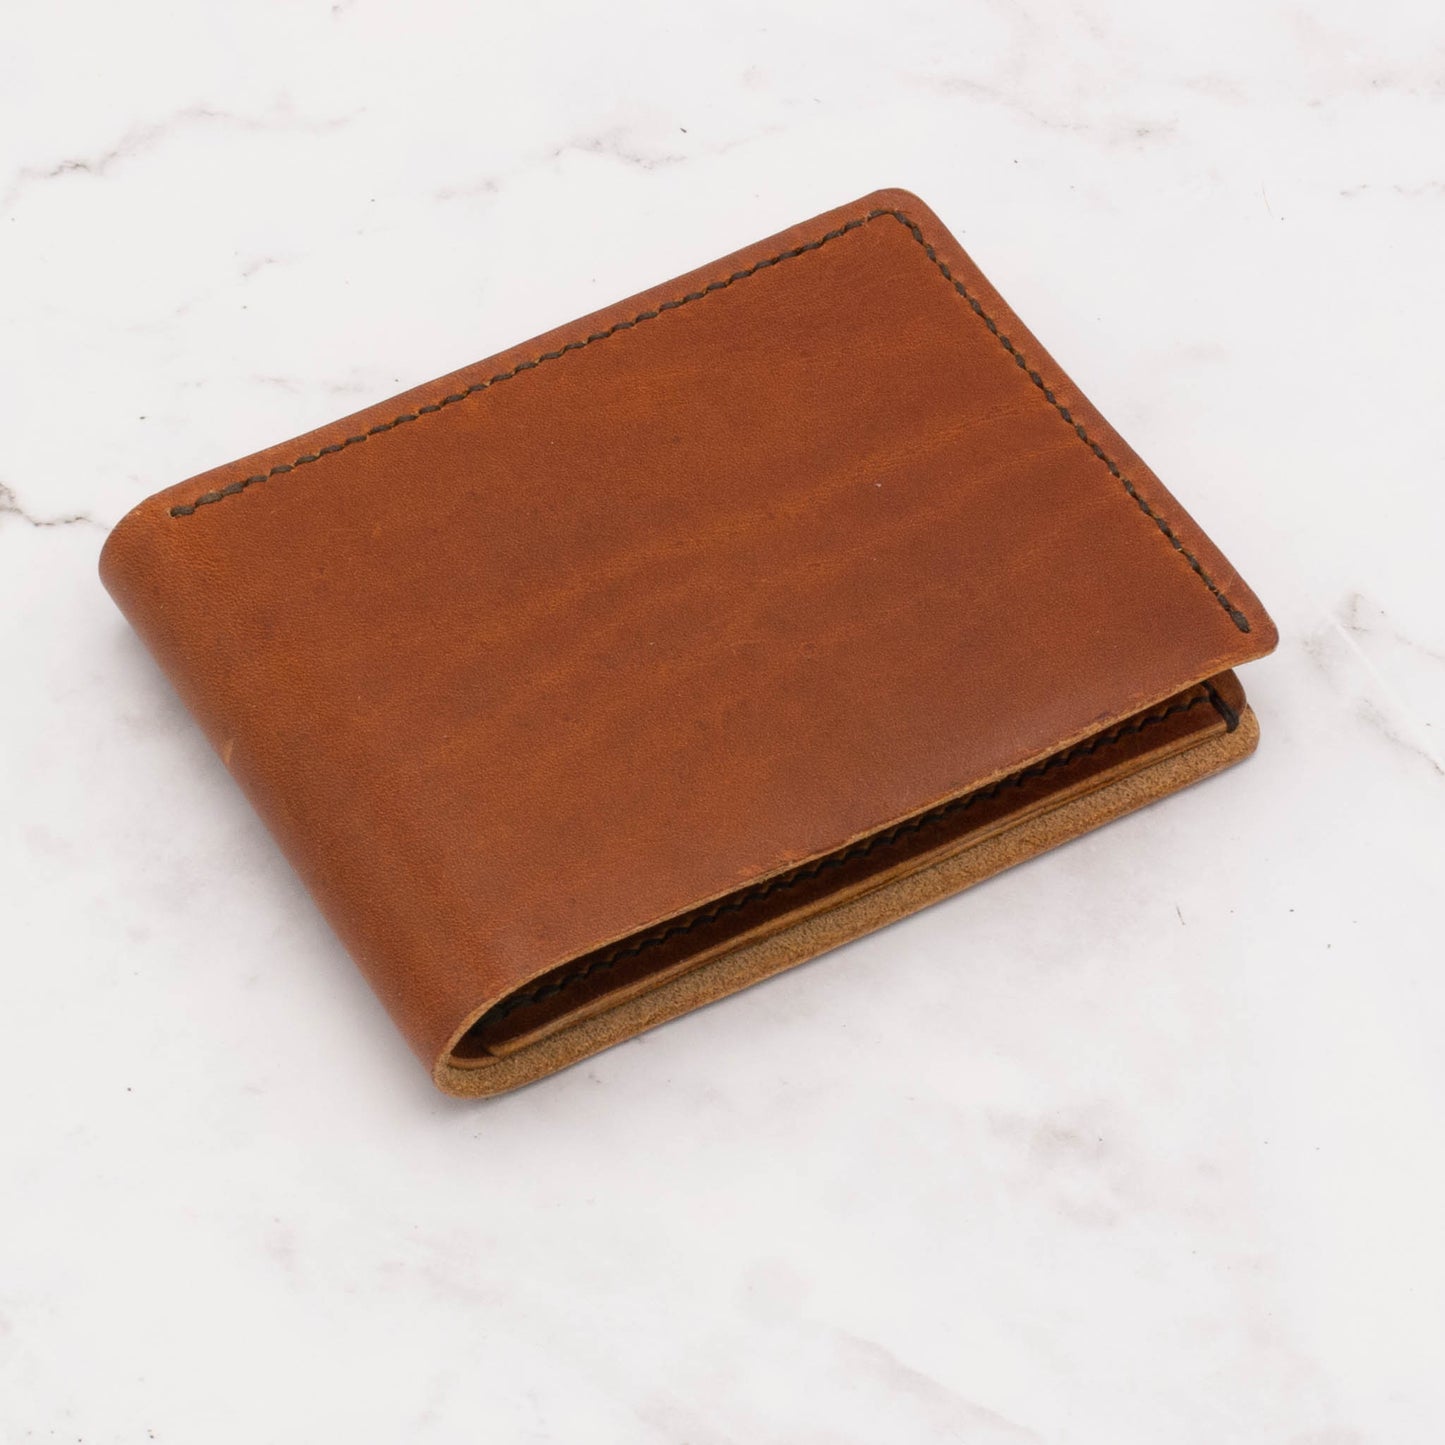 Handcrafted Leather Classic Bifold Wallet - English Tan